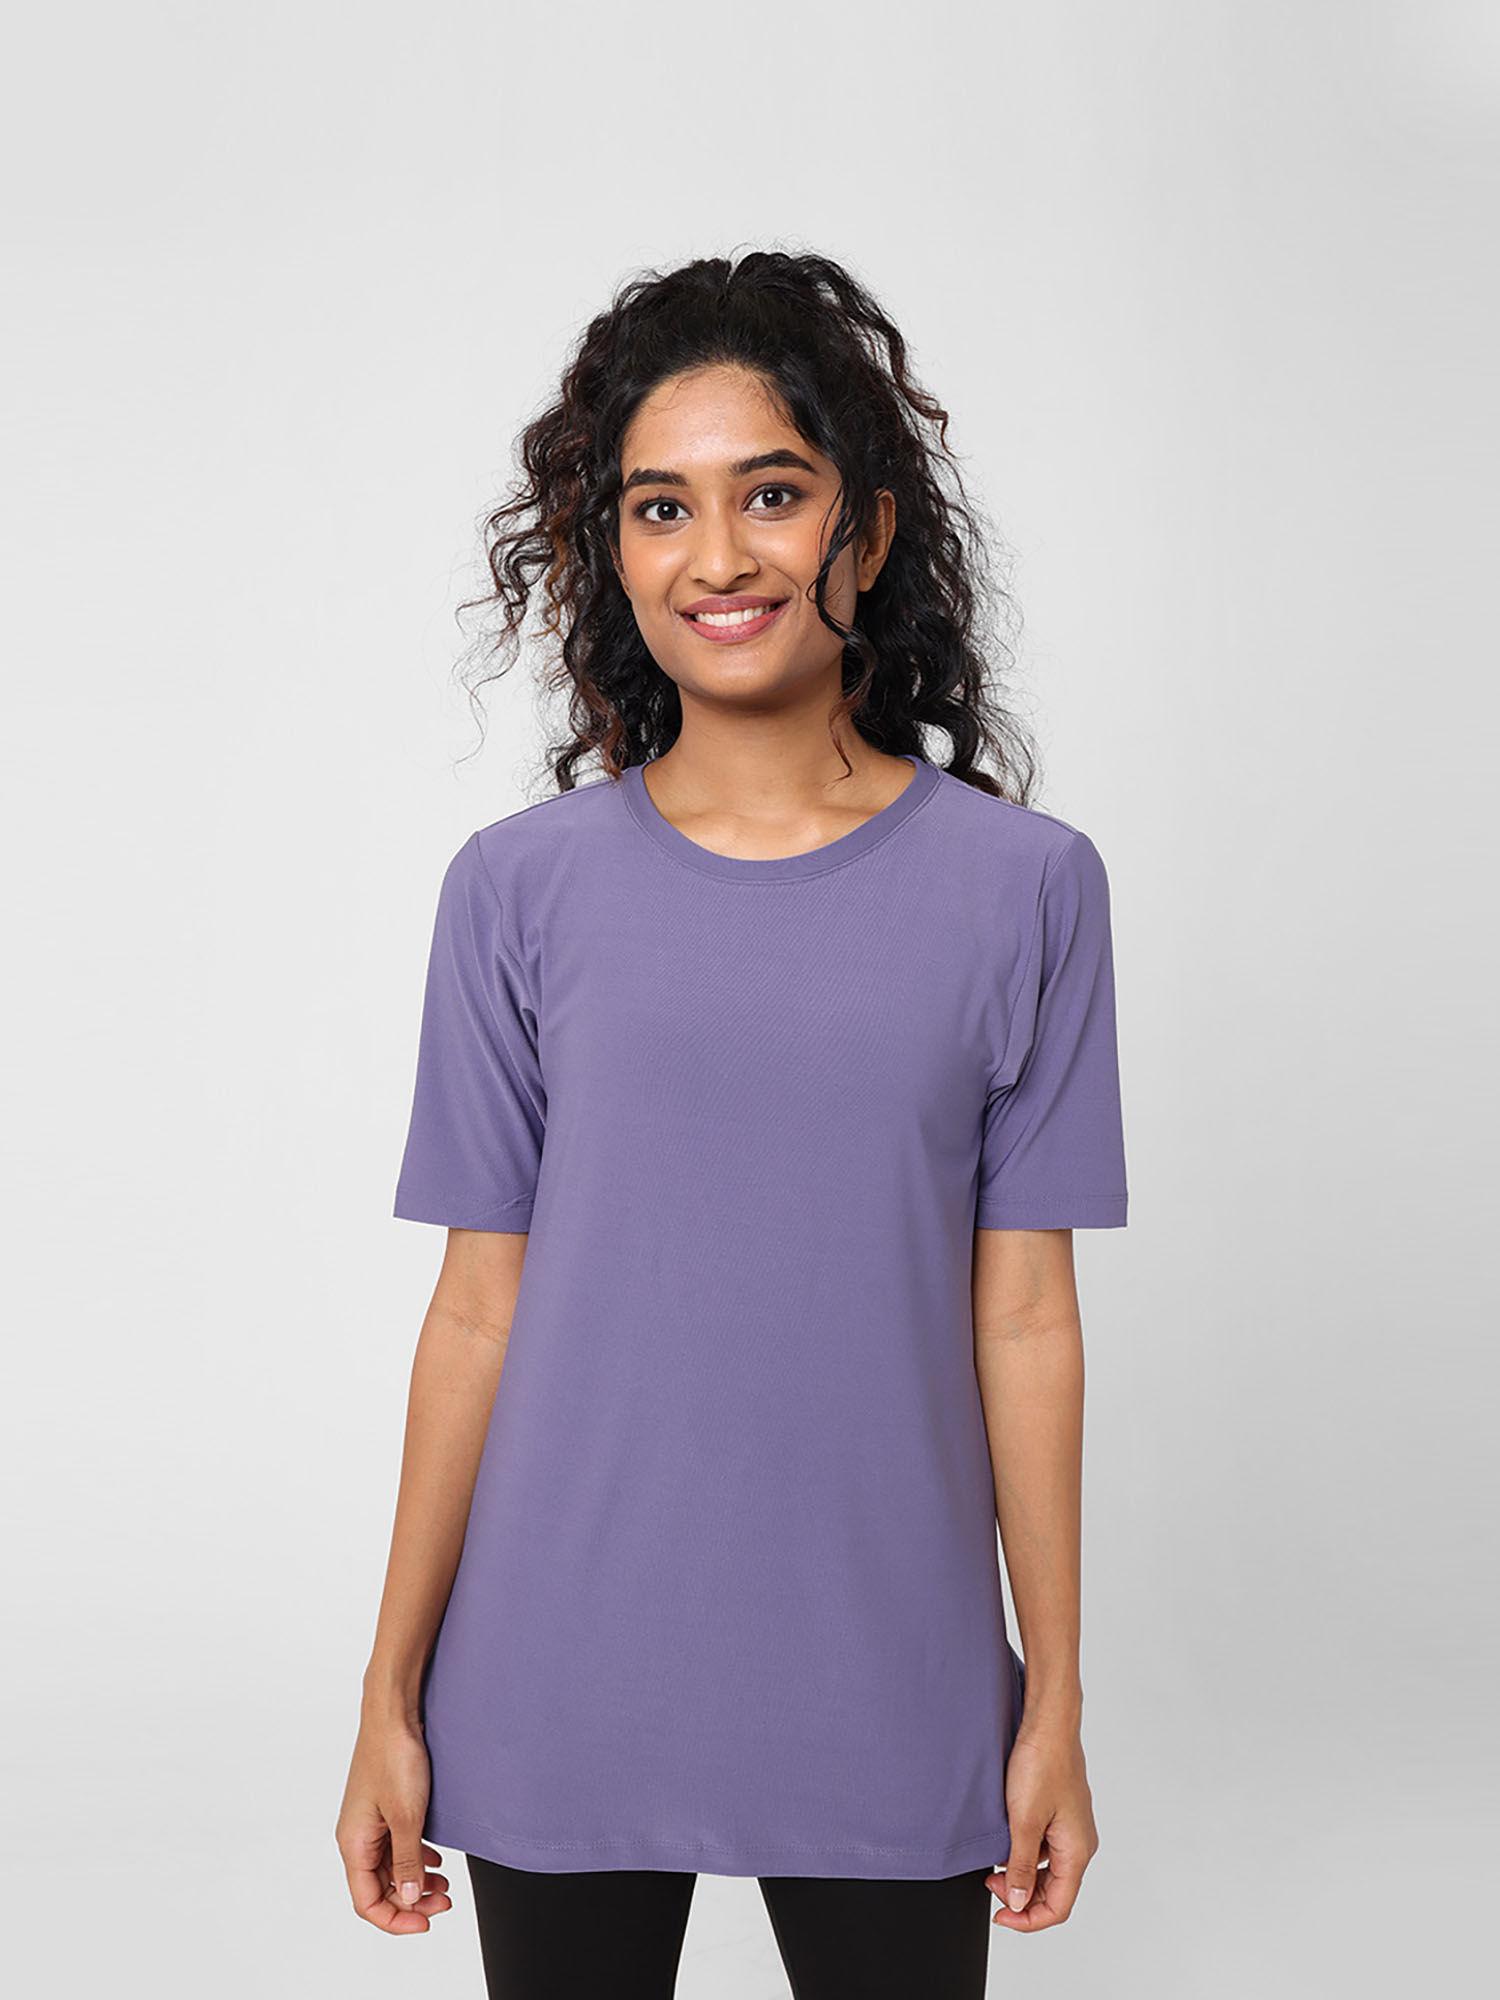 women-lavender-breezy-kur-tee-with-2-pockets-and-side-slit